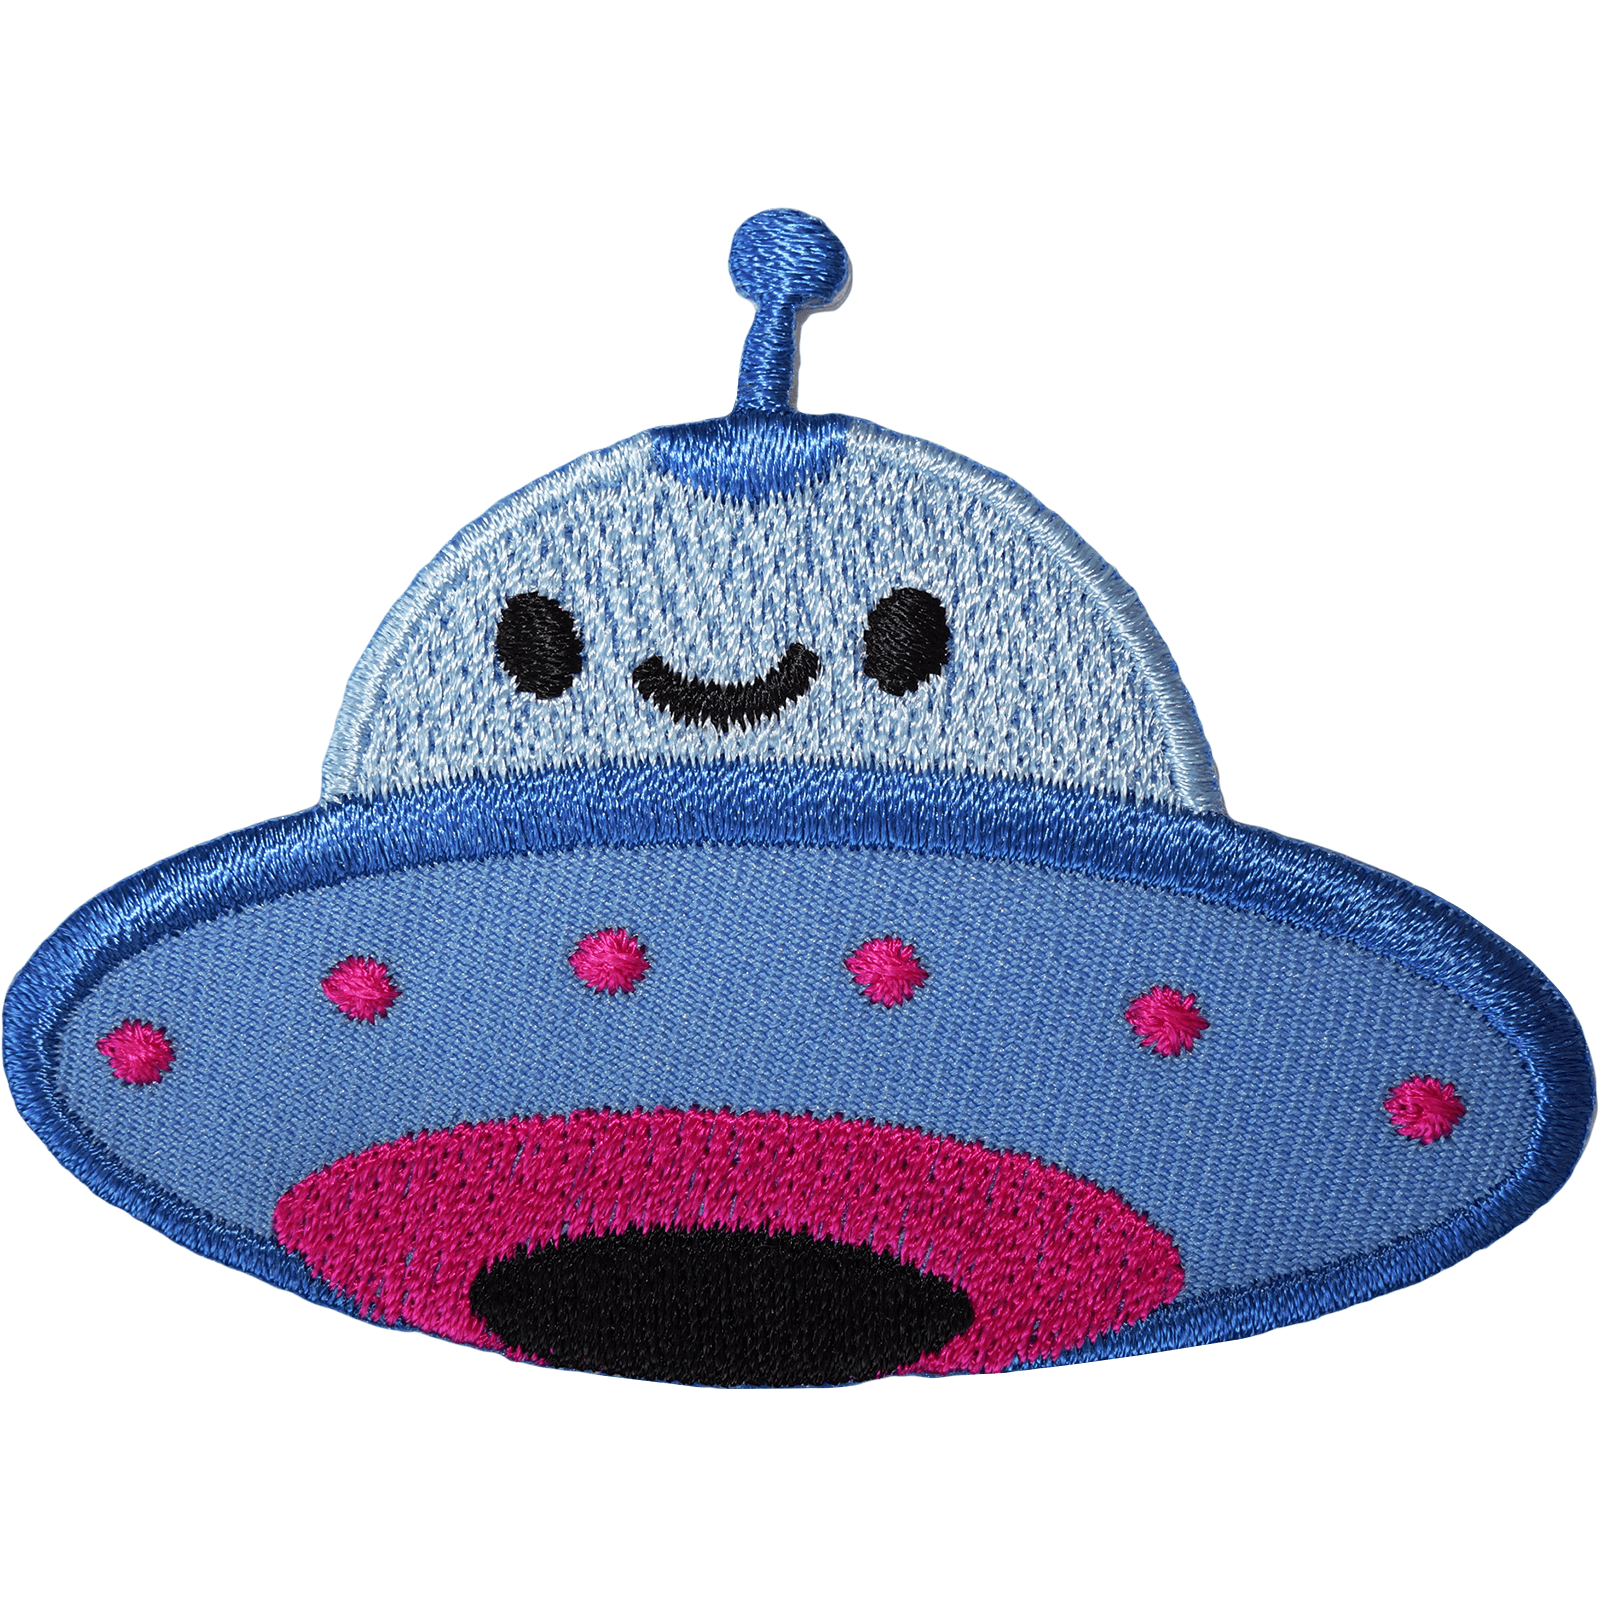 Flying Saucer Patch Iron Sew On Alien Spaceship Sci Fi Space Embroidered Badge